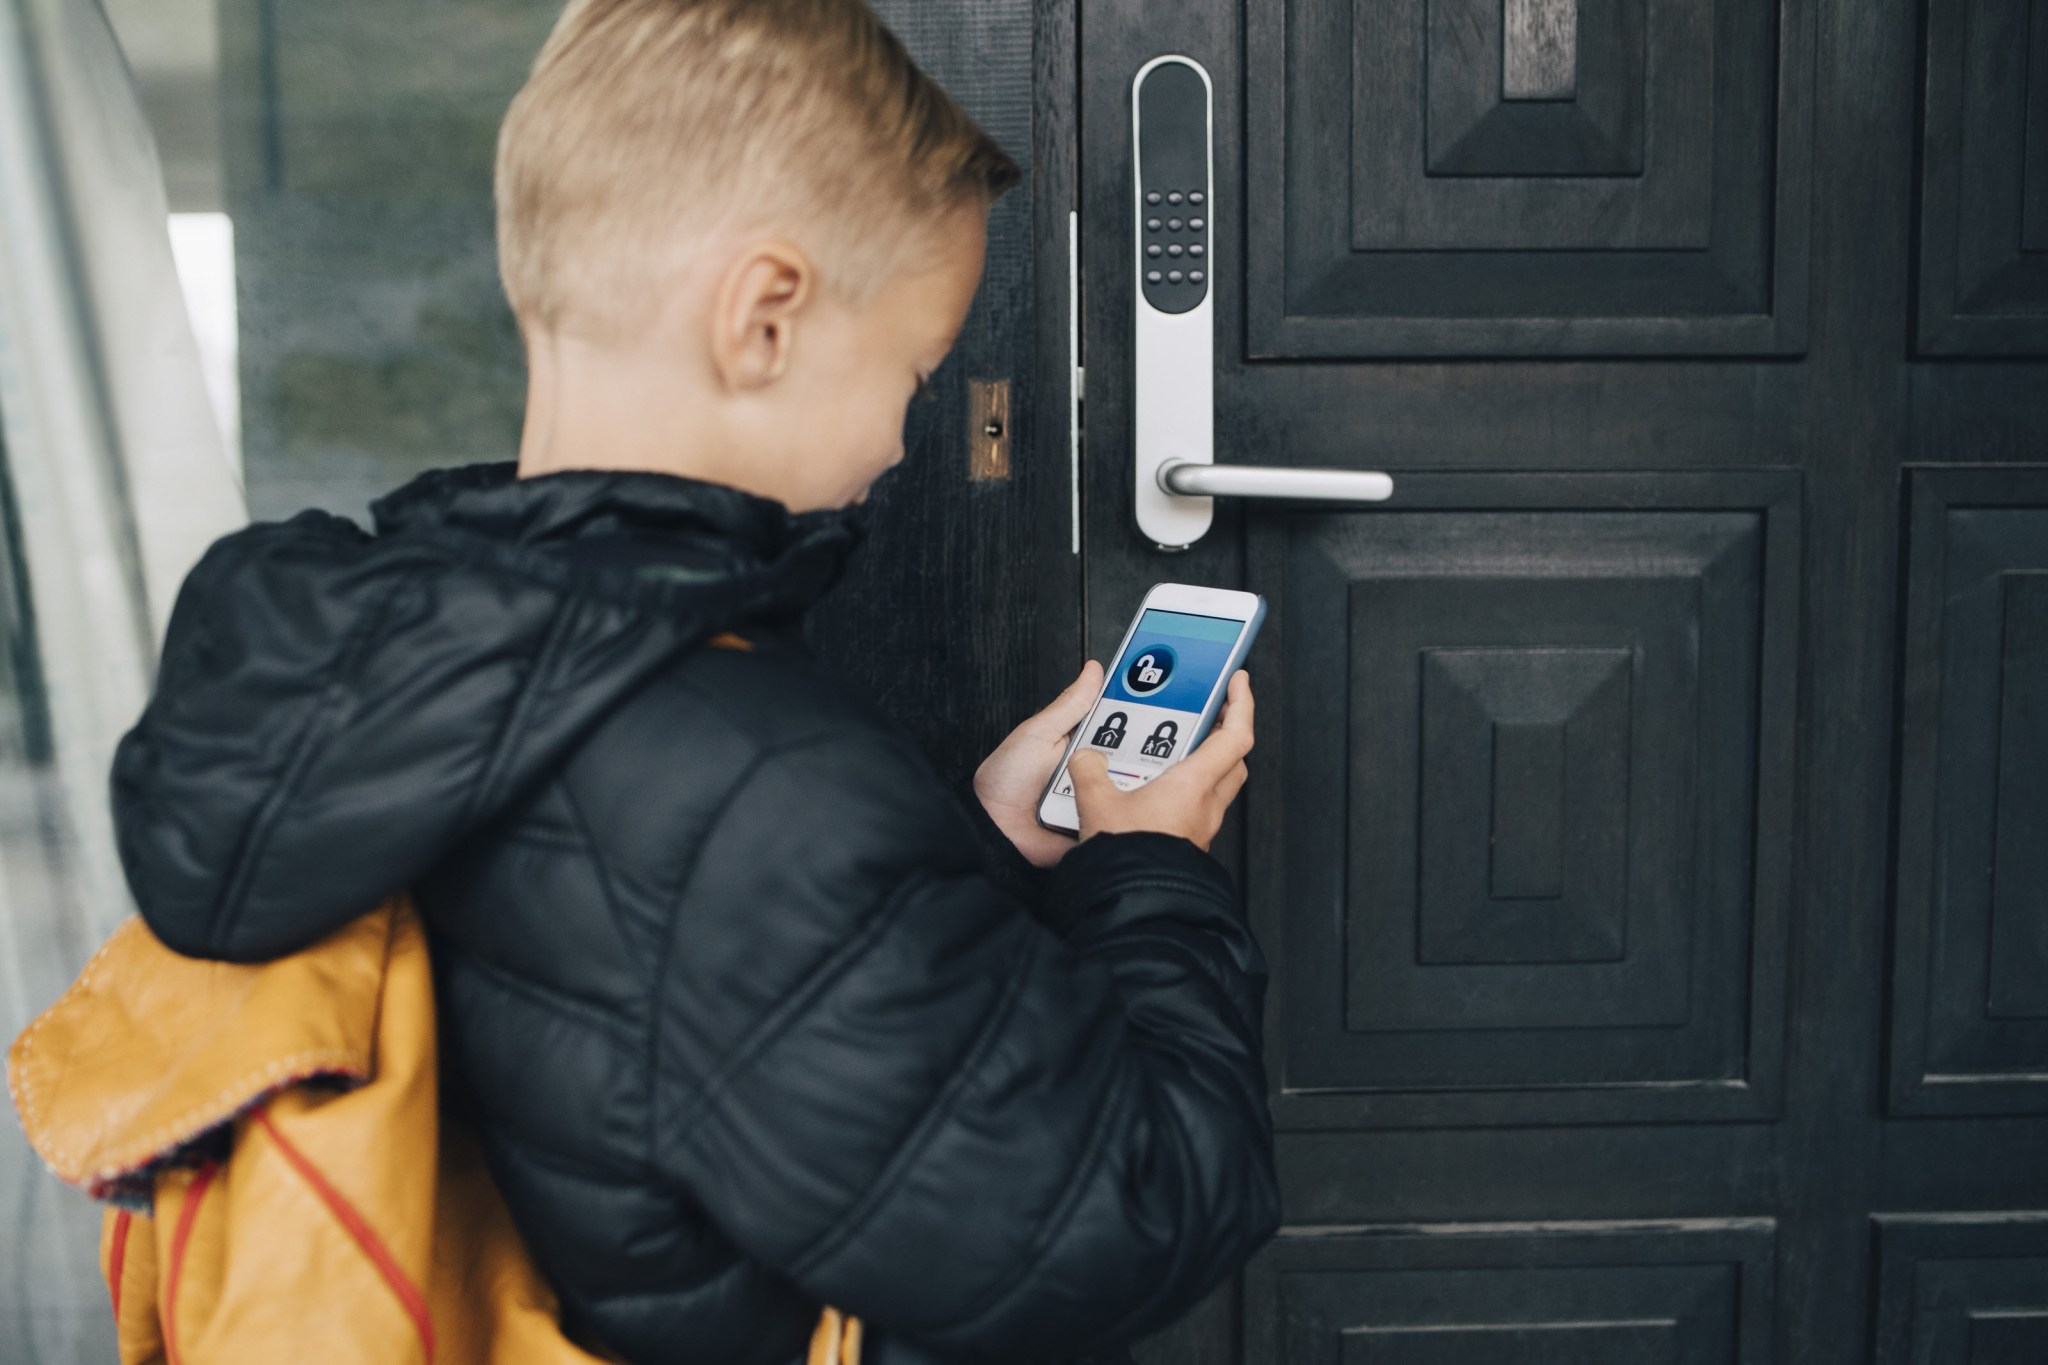 smart home security overview boy using mobile phone to unlock smart lock